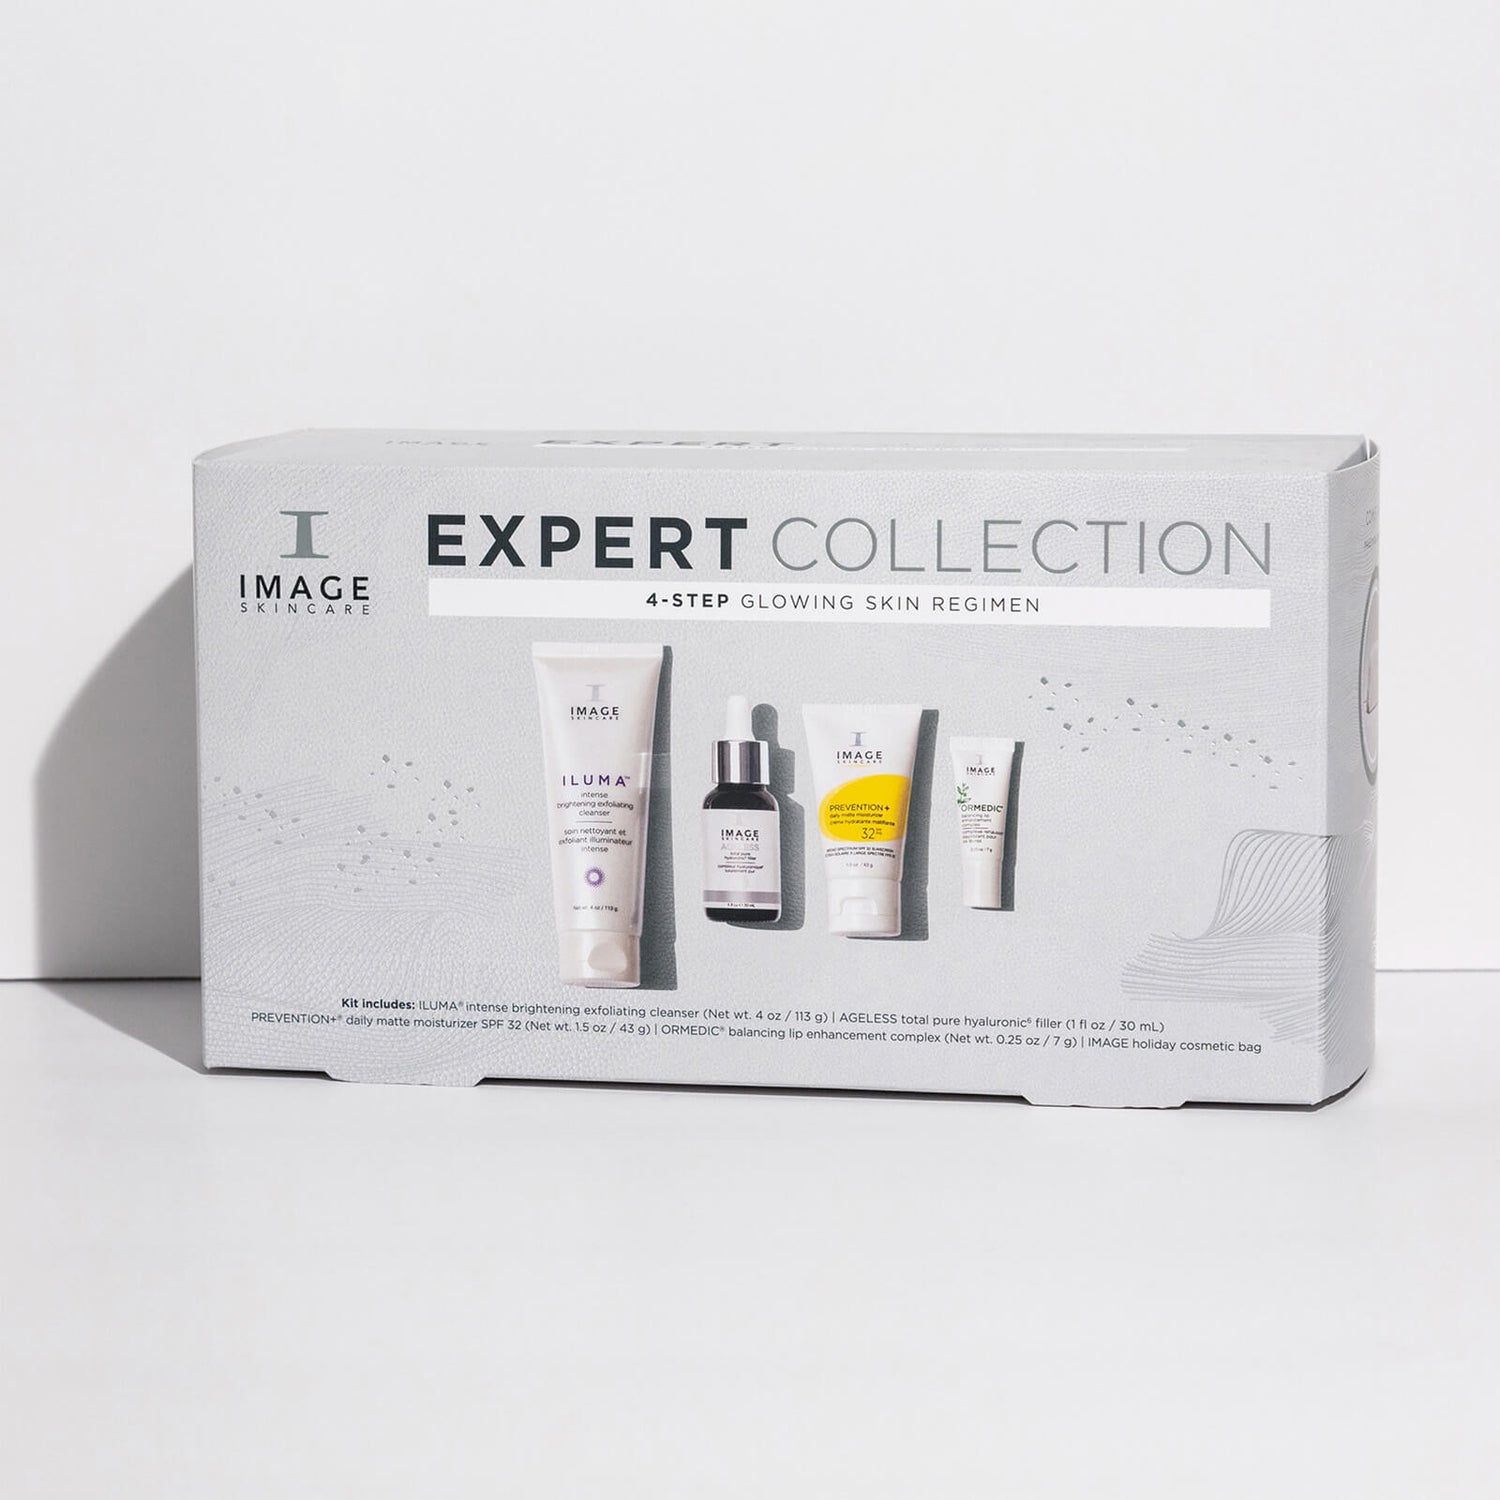 IMAGE Skincare Expert Collection (Worth $155.50)